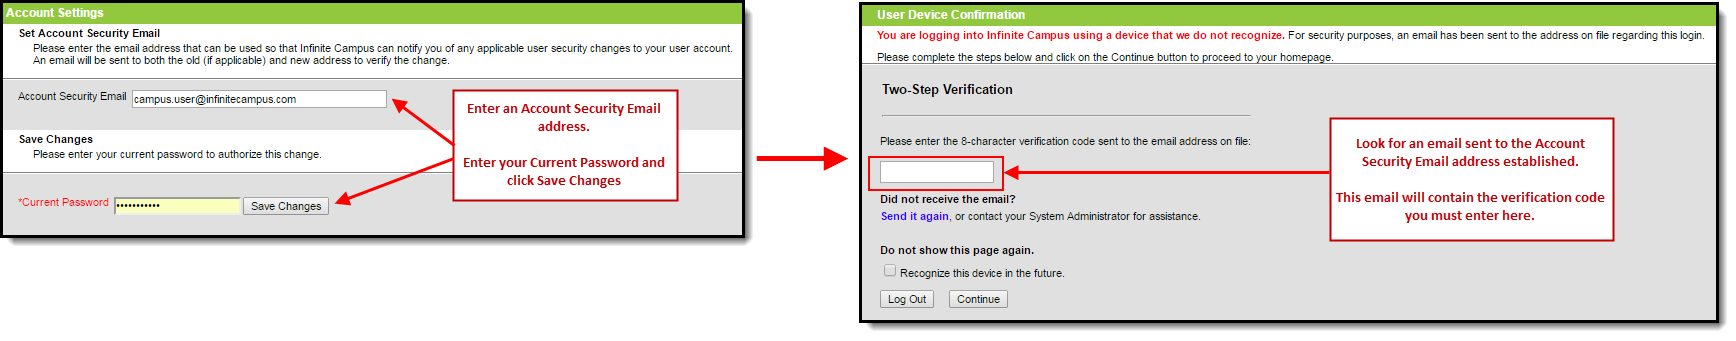 screenshot of inputting your account security email and current password to receive a two step verification code